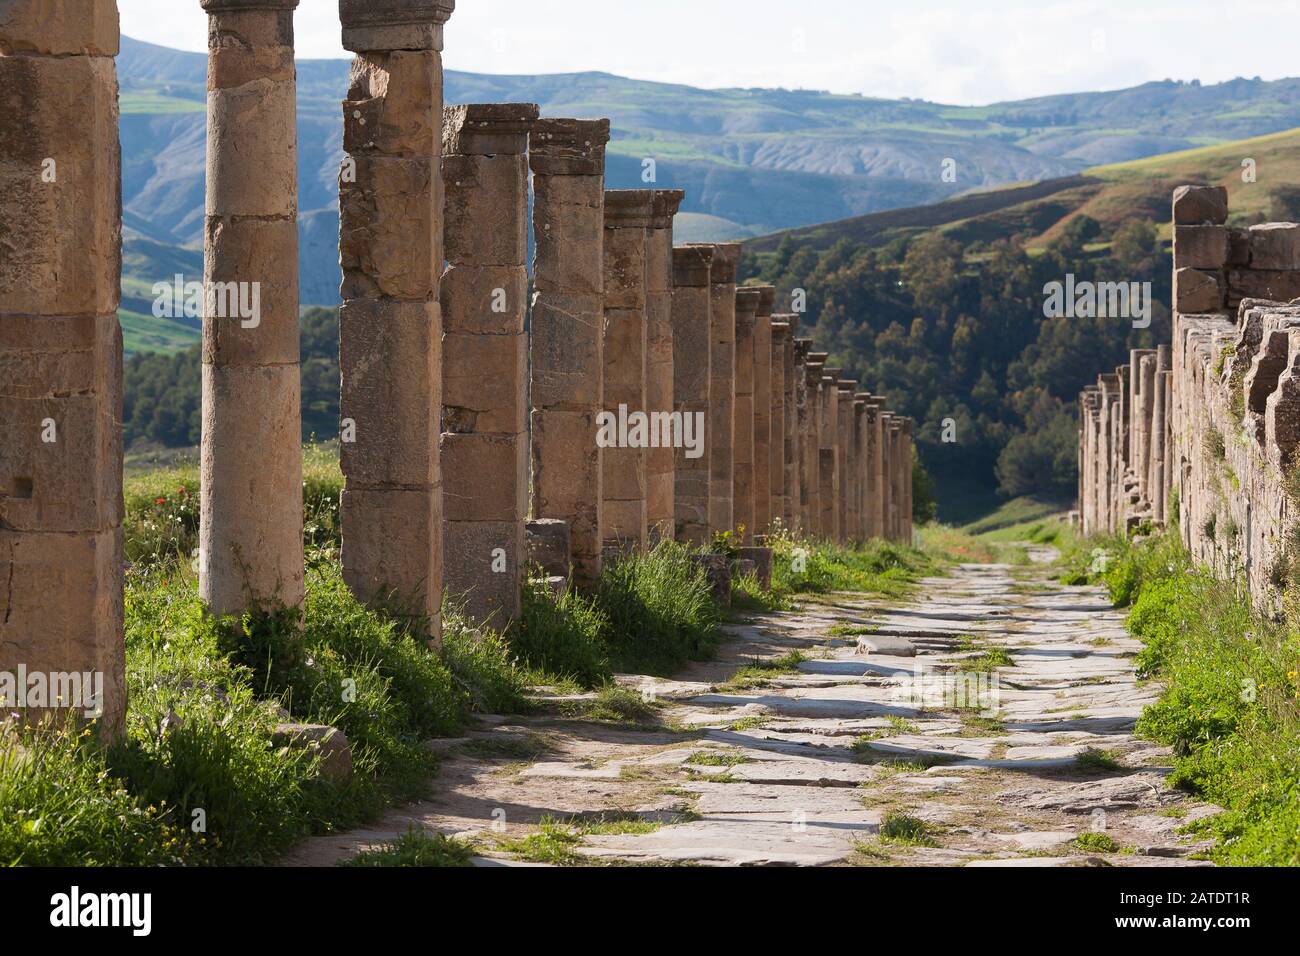 Remains of the village of Cuicul at the Ancient Roman ruins of Djemilla, A UNESCO World Heritage site in Northern Algeria. Stock Photo